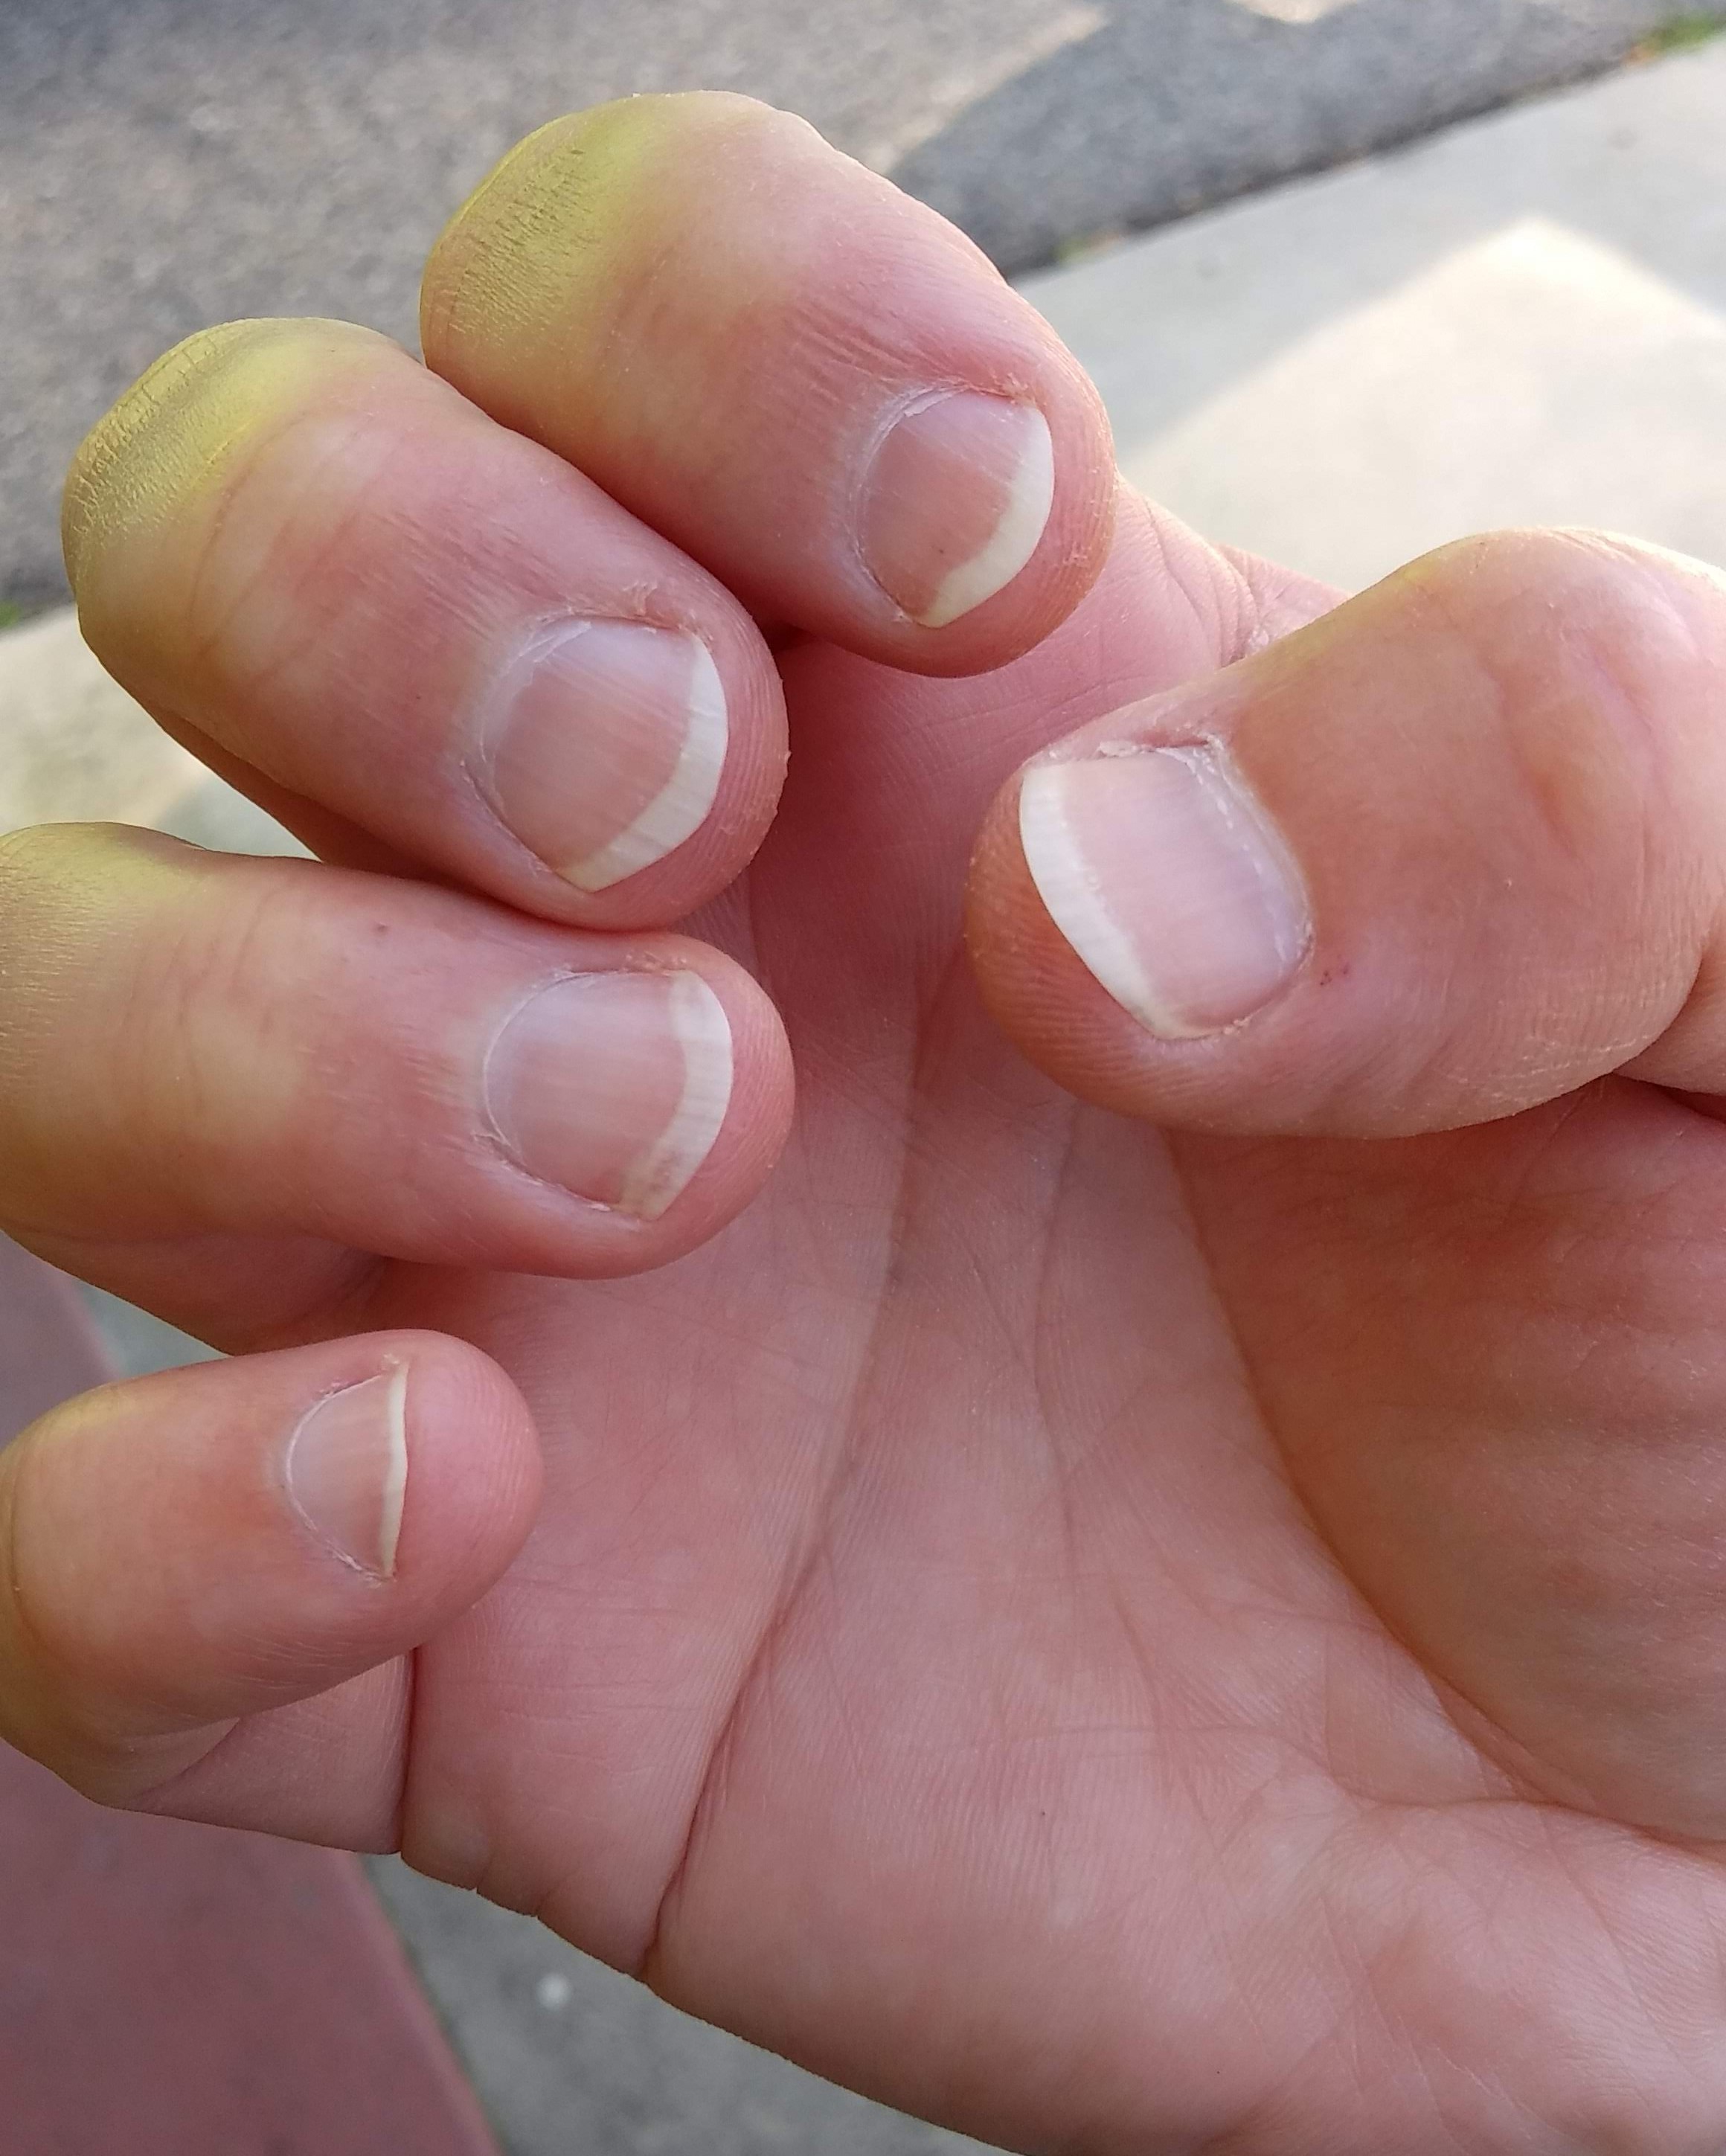 The fingernails on my right hand for playing the classical guitar